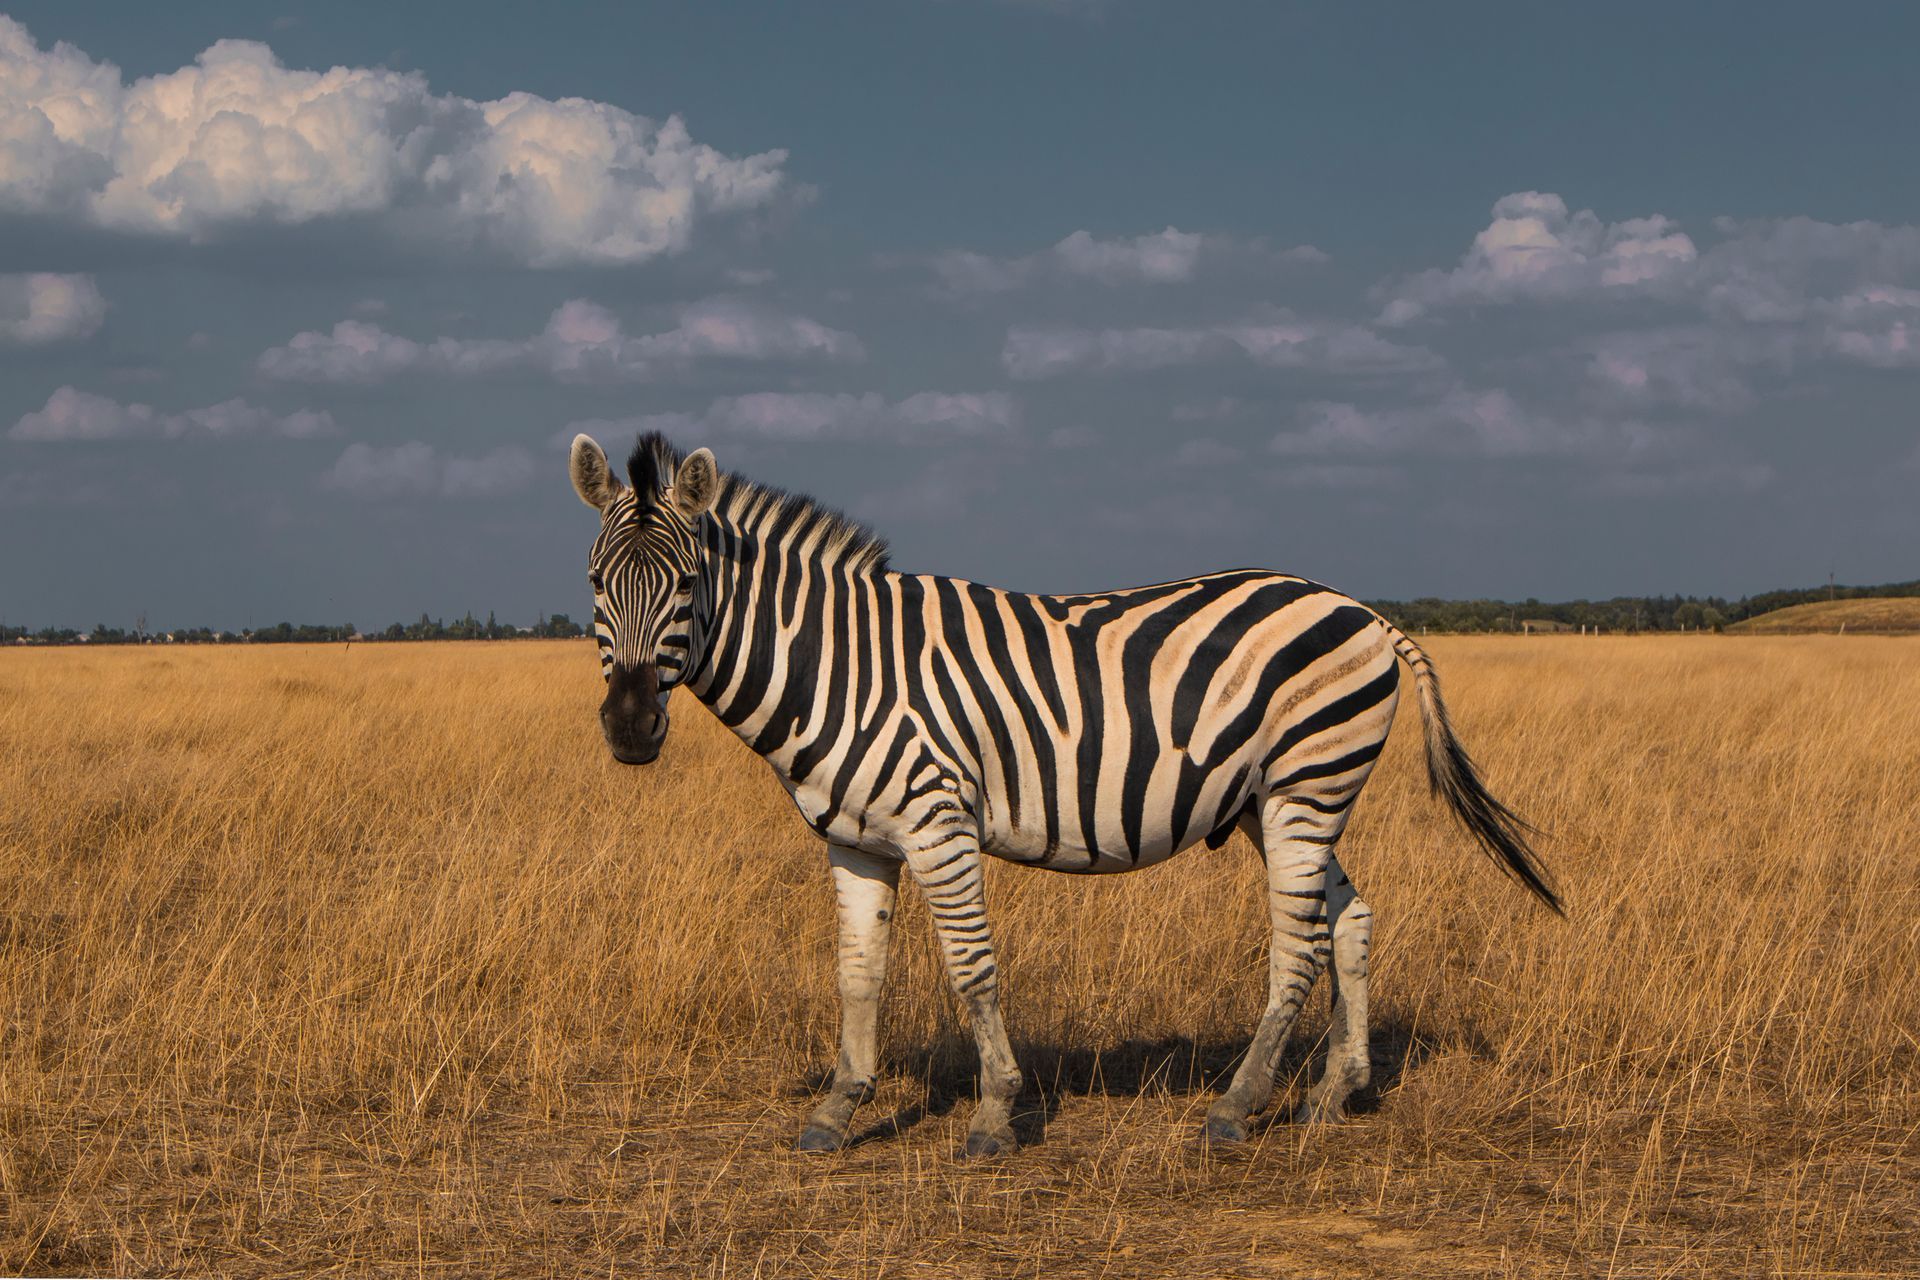 a zebra standing in a field with a cloudy sky in the background